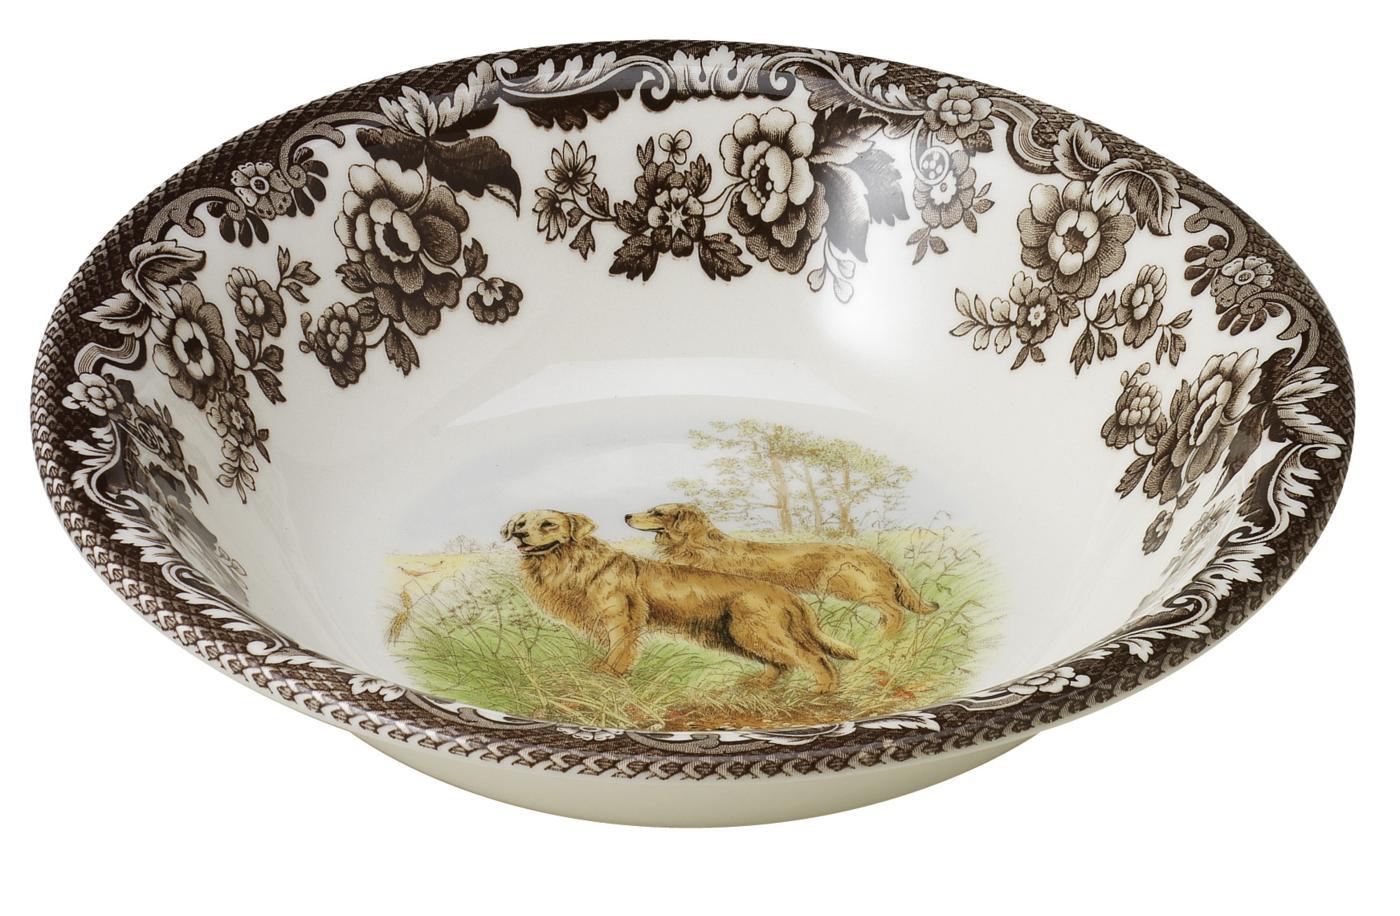 Woodland Ascot Cereal Bowl 8 Inch, Golden Retriever image number null